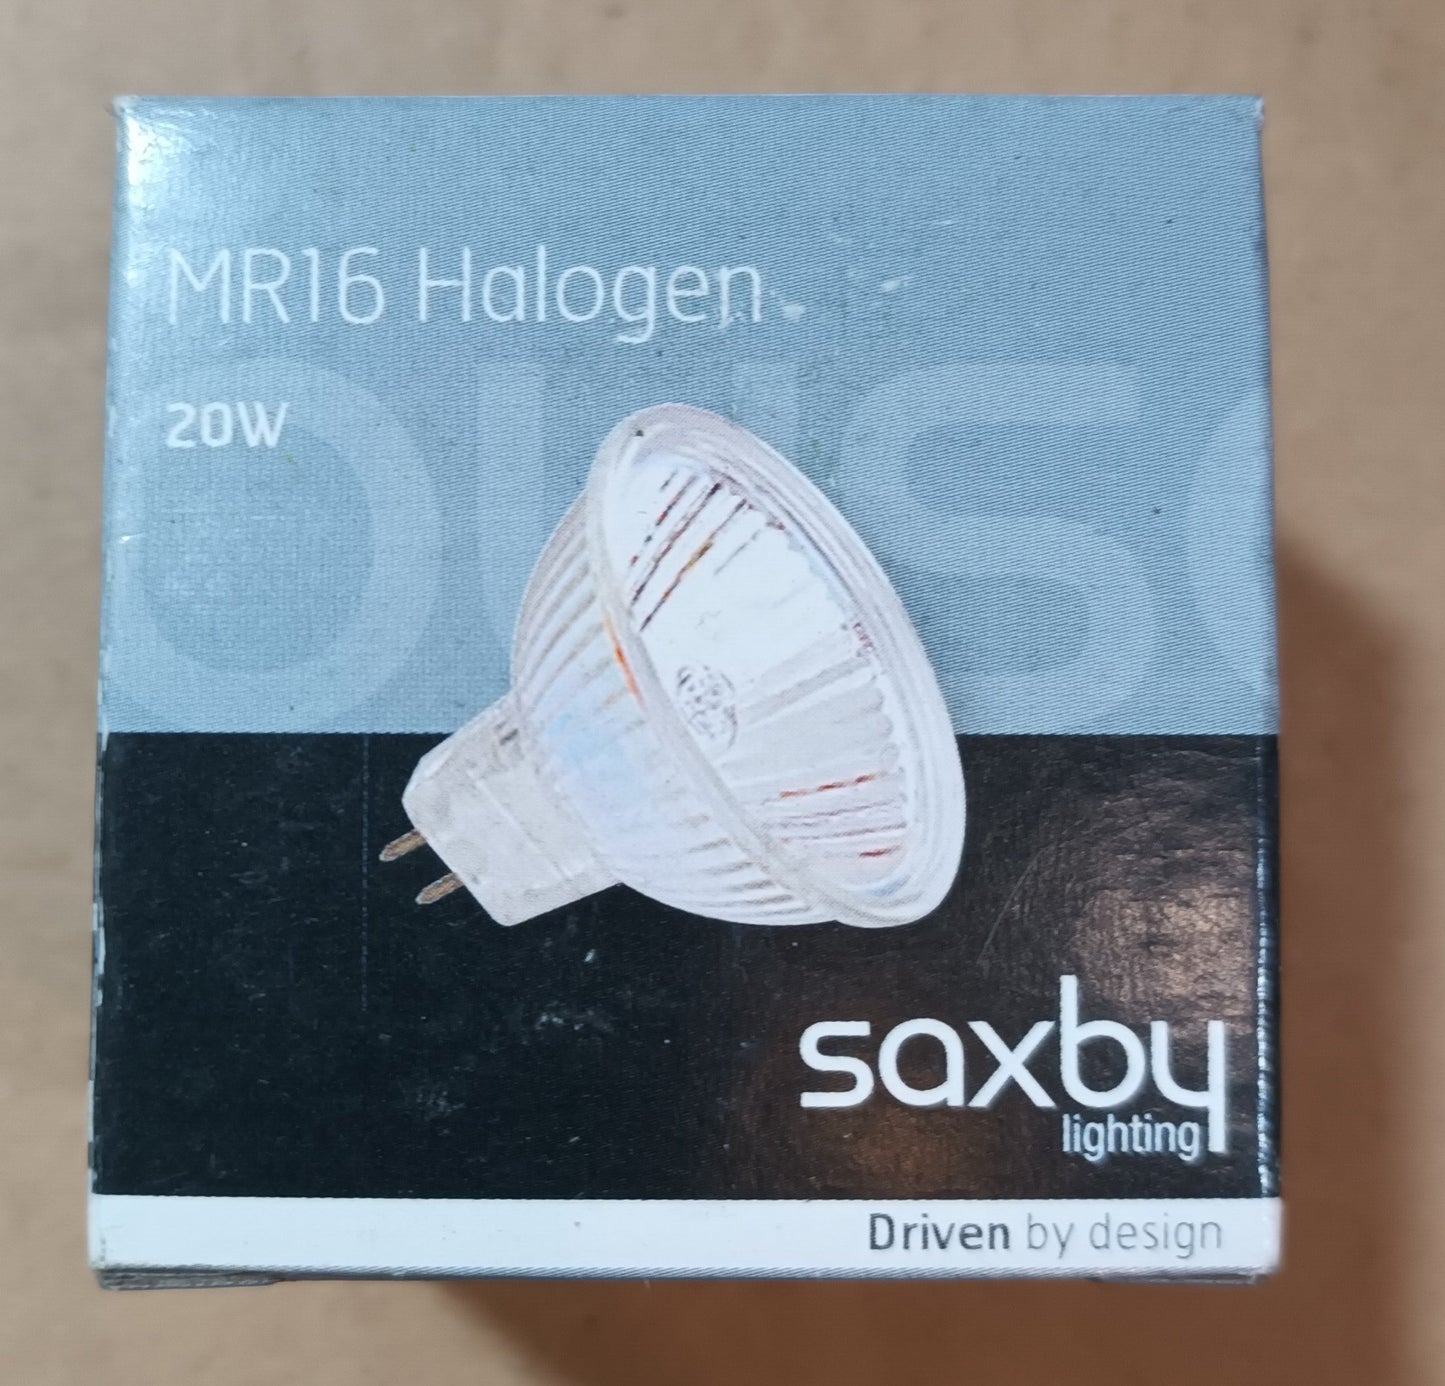 20 W MR16 250lm Halogen light bulb by Saxby